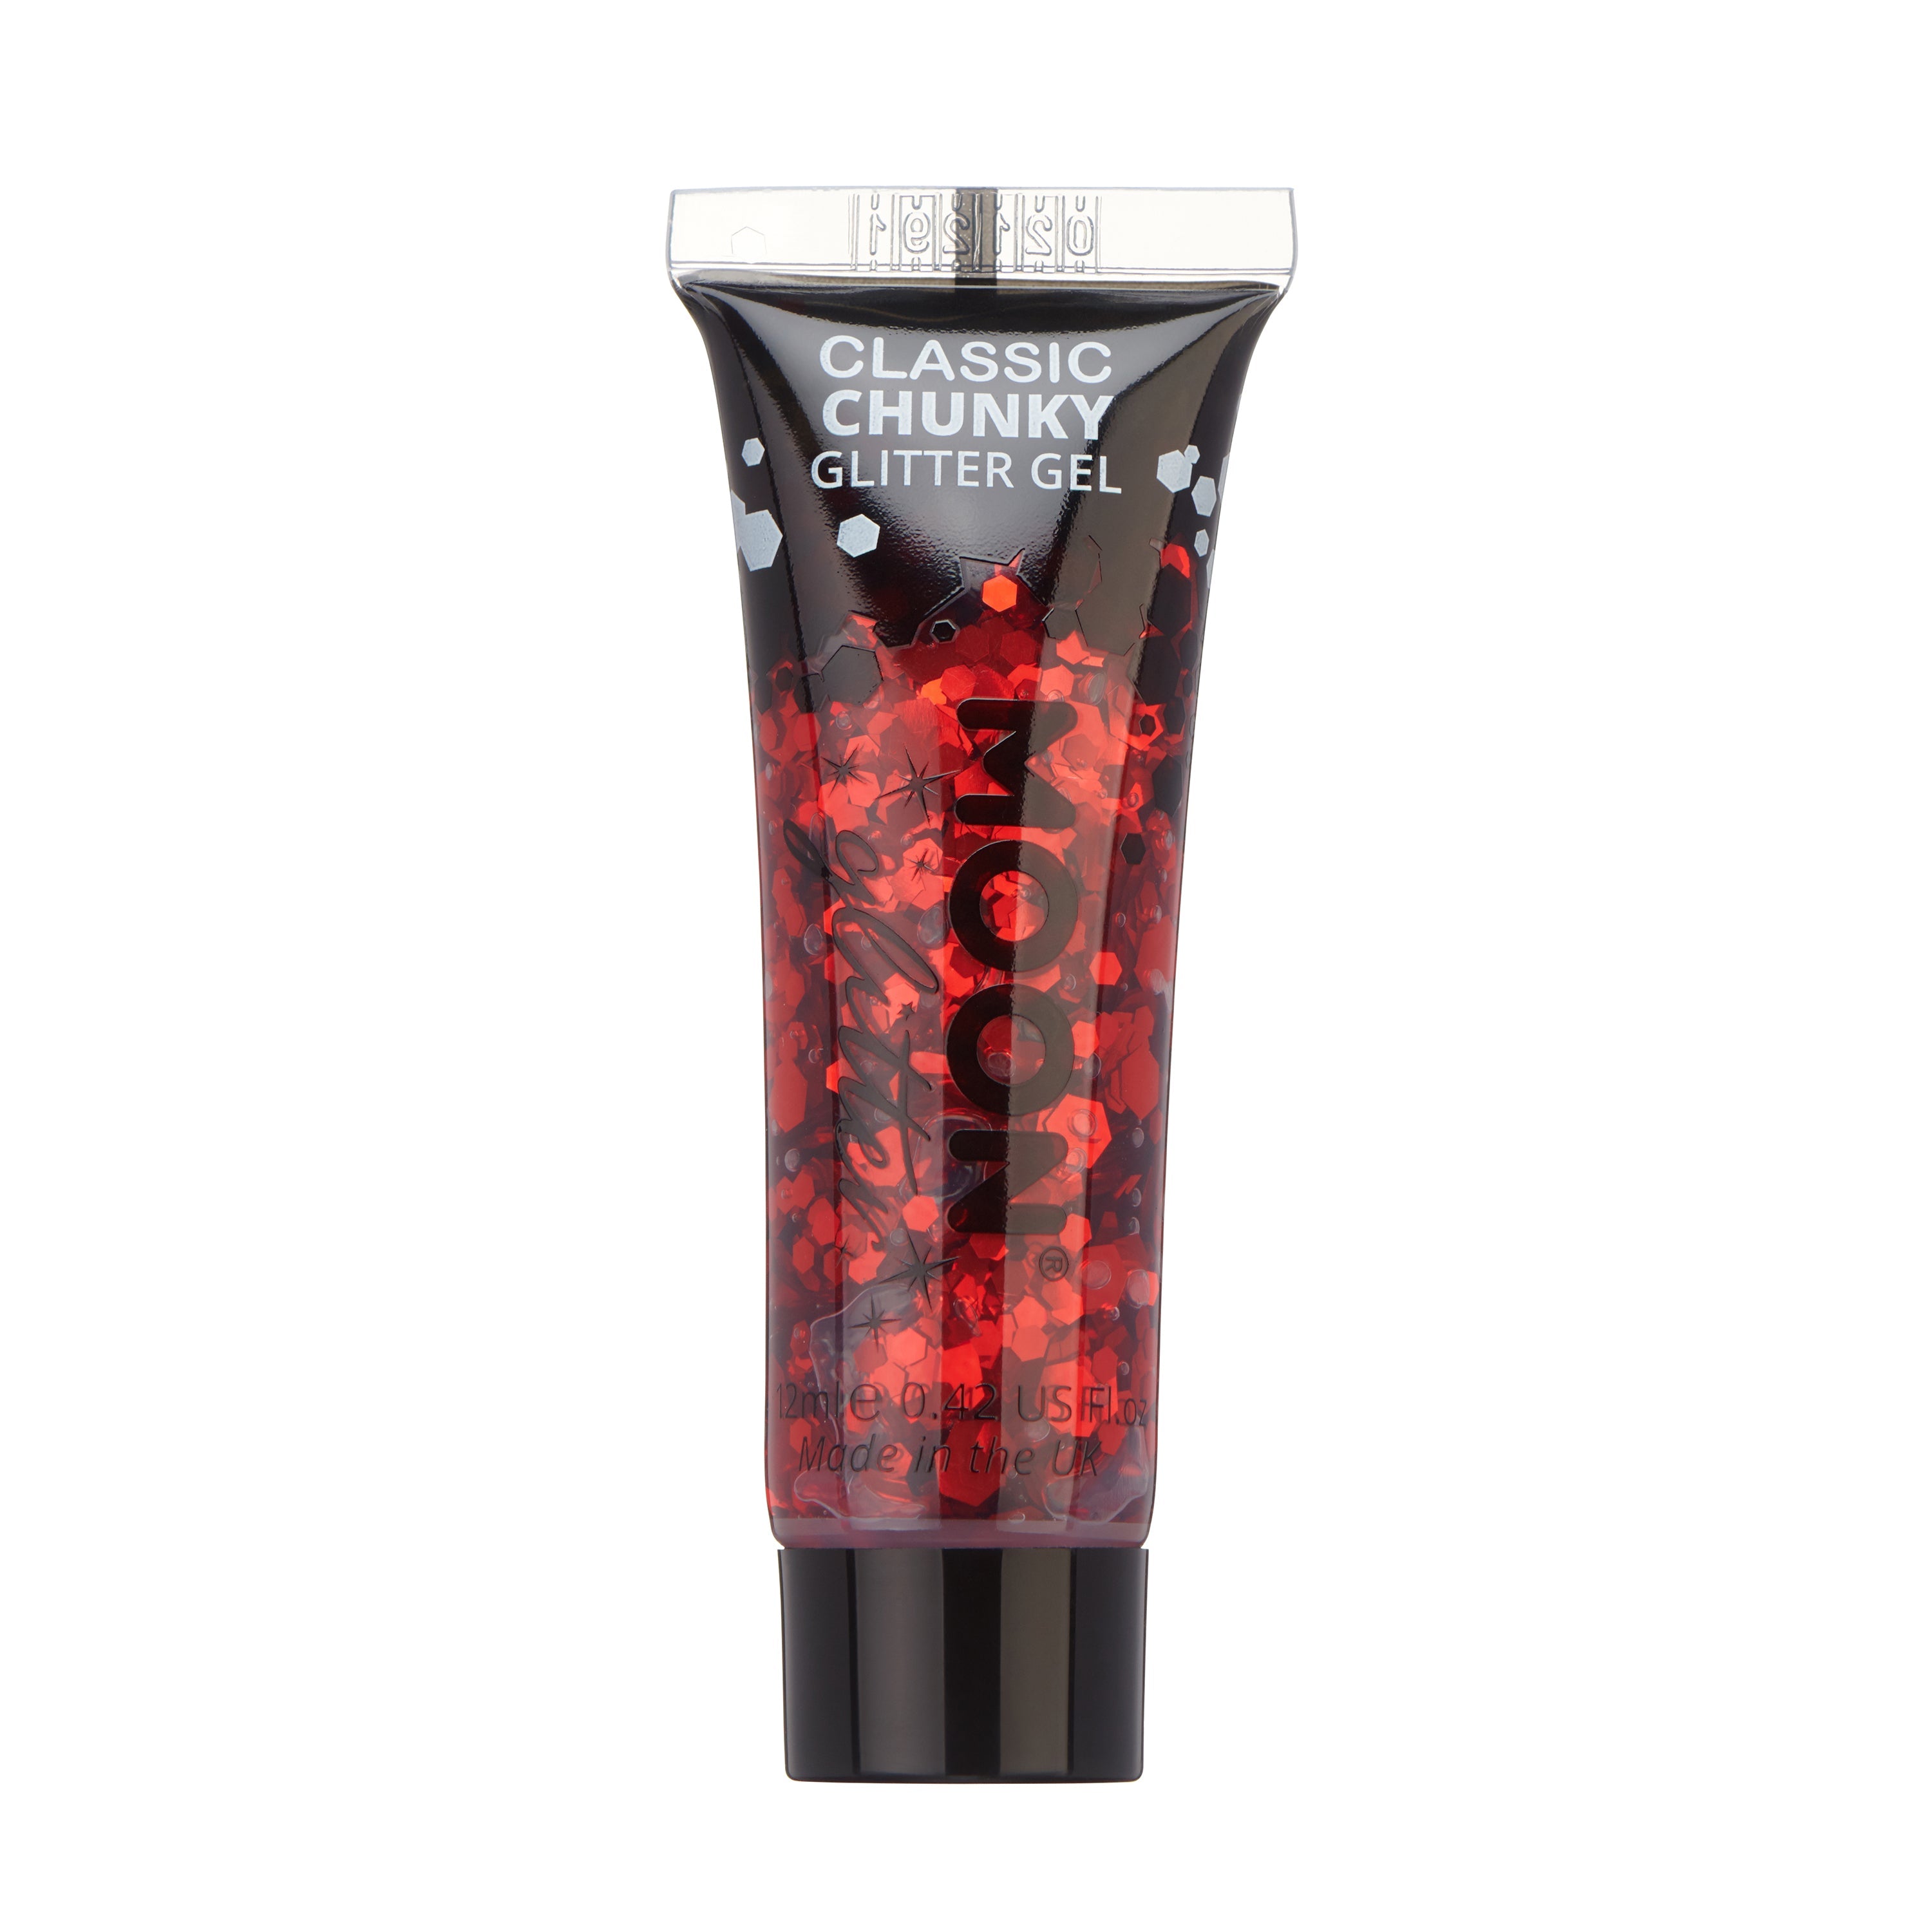 Red - Classic Chunky Face & Body Glitter Gel, 12mL. Cosmetically certified, FDA & Health Canada compliant, cruelty free and vegan.